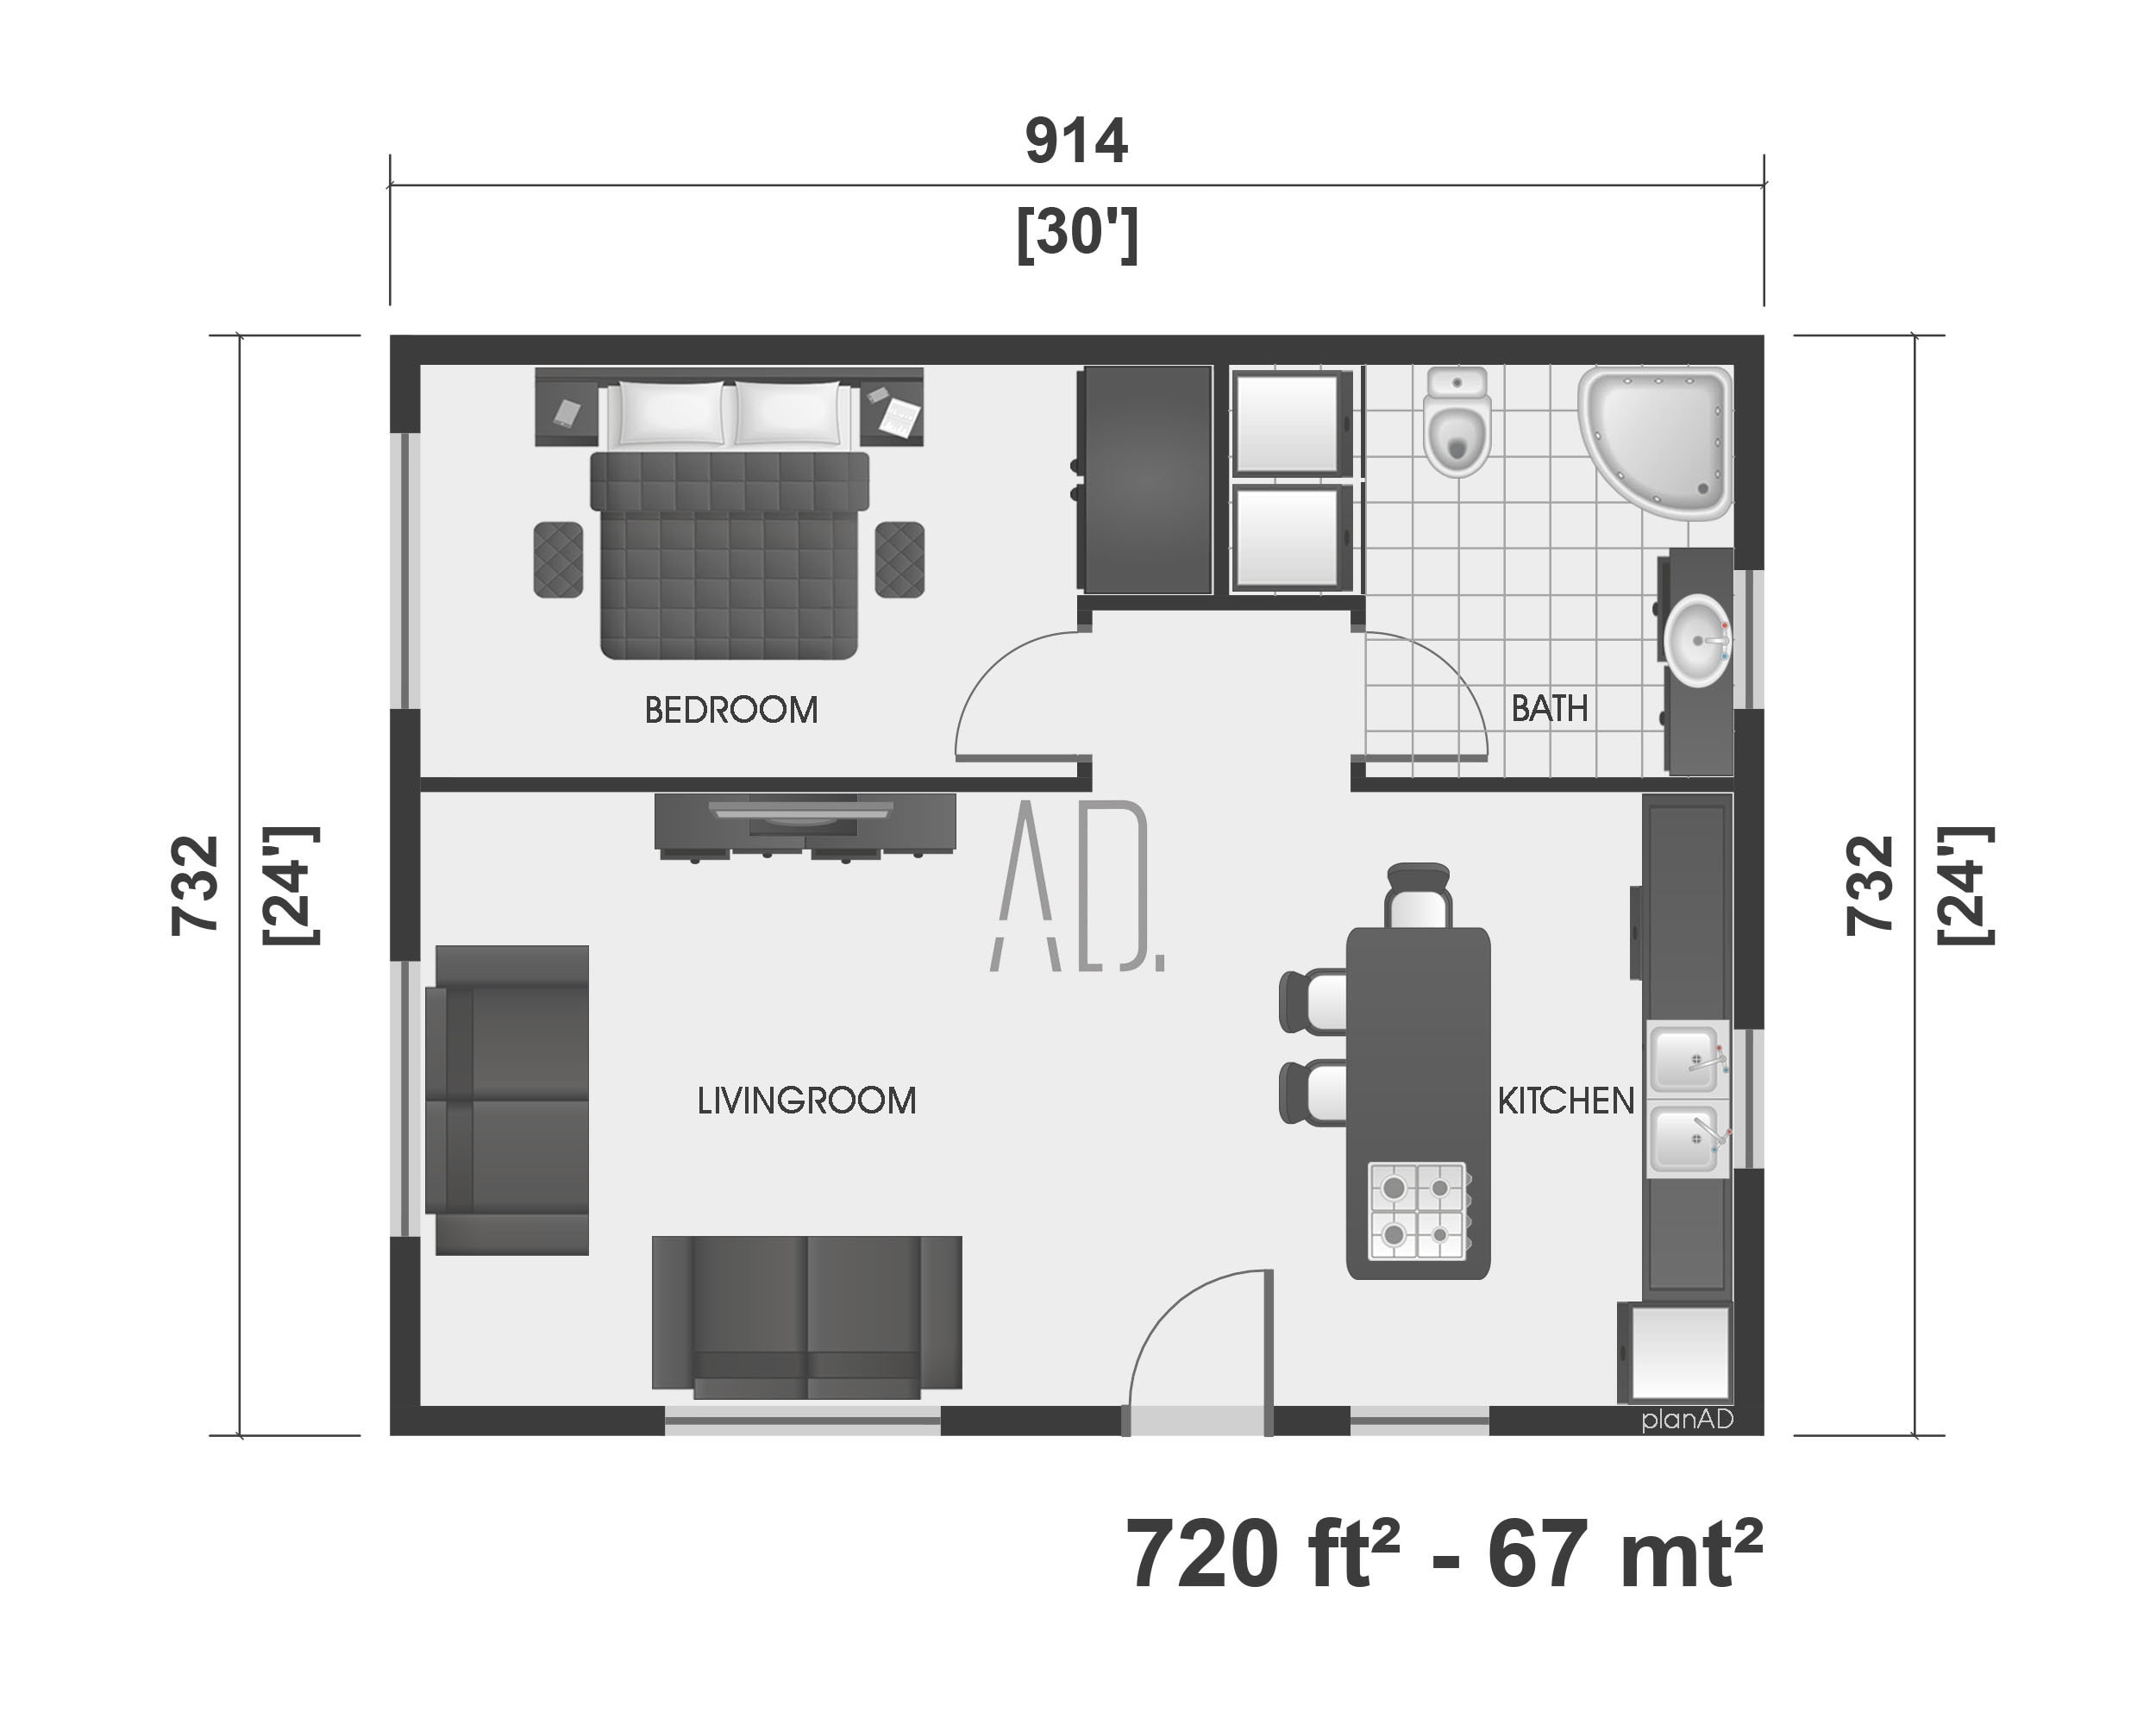 700 Sq Ft House Plans - Etsy